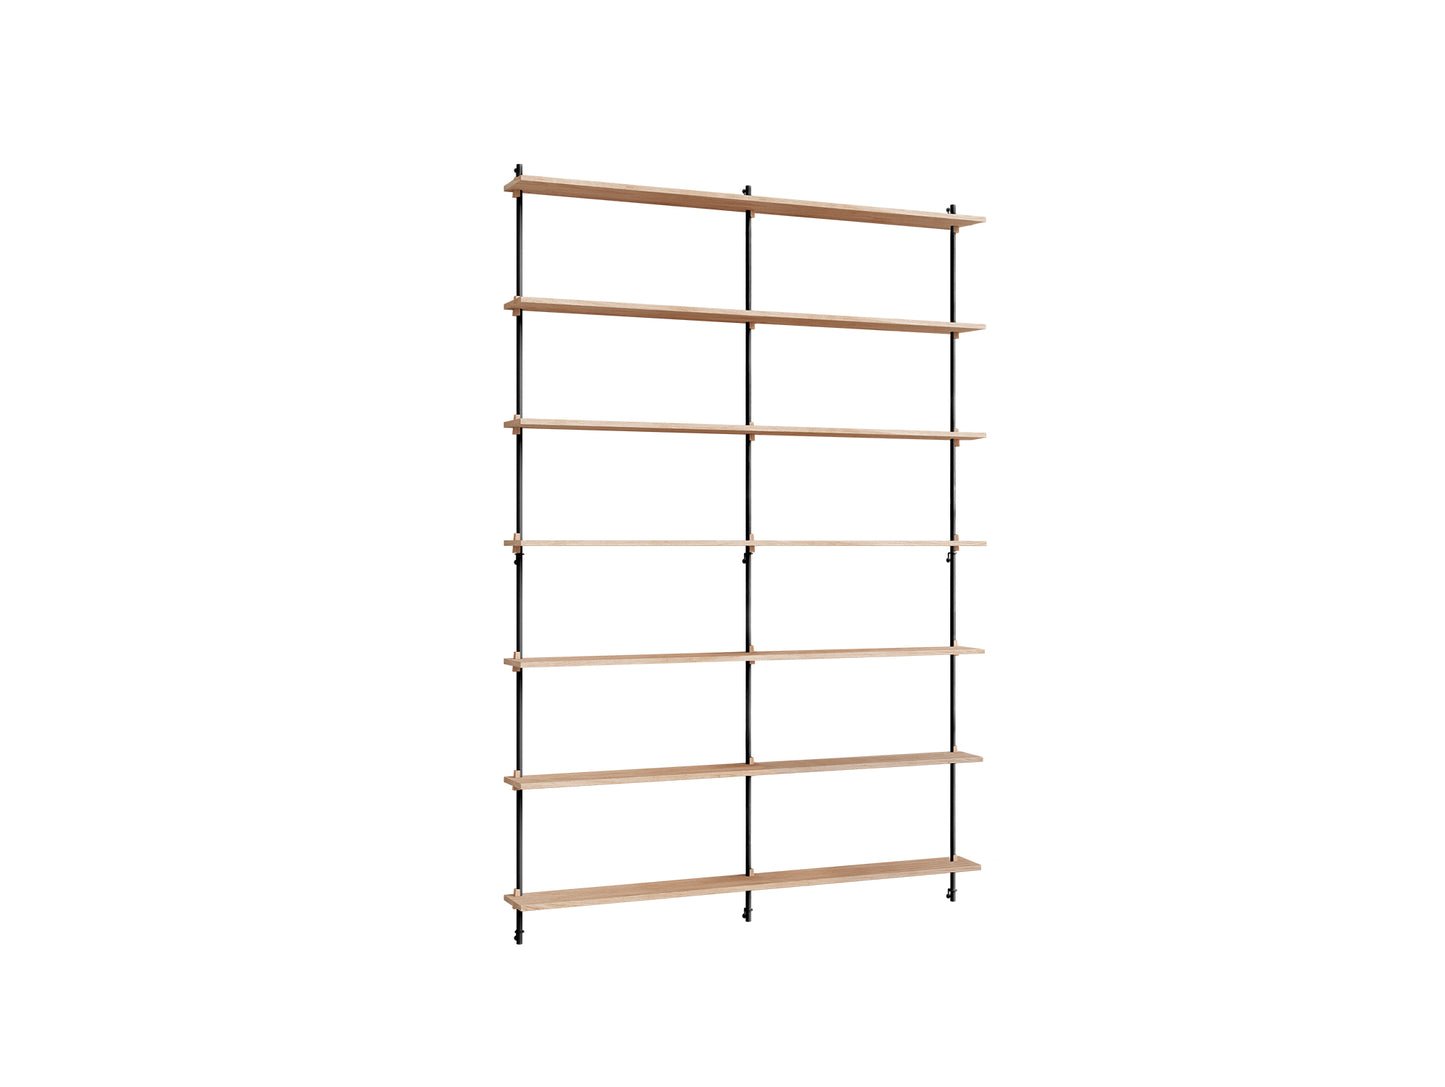 Wall Shelving System Sets (230 cm) by Moebe - WS.230.2.B / Black Uprights / Oiled Oak